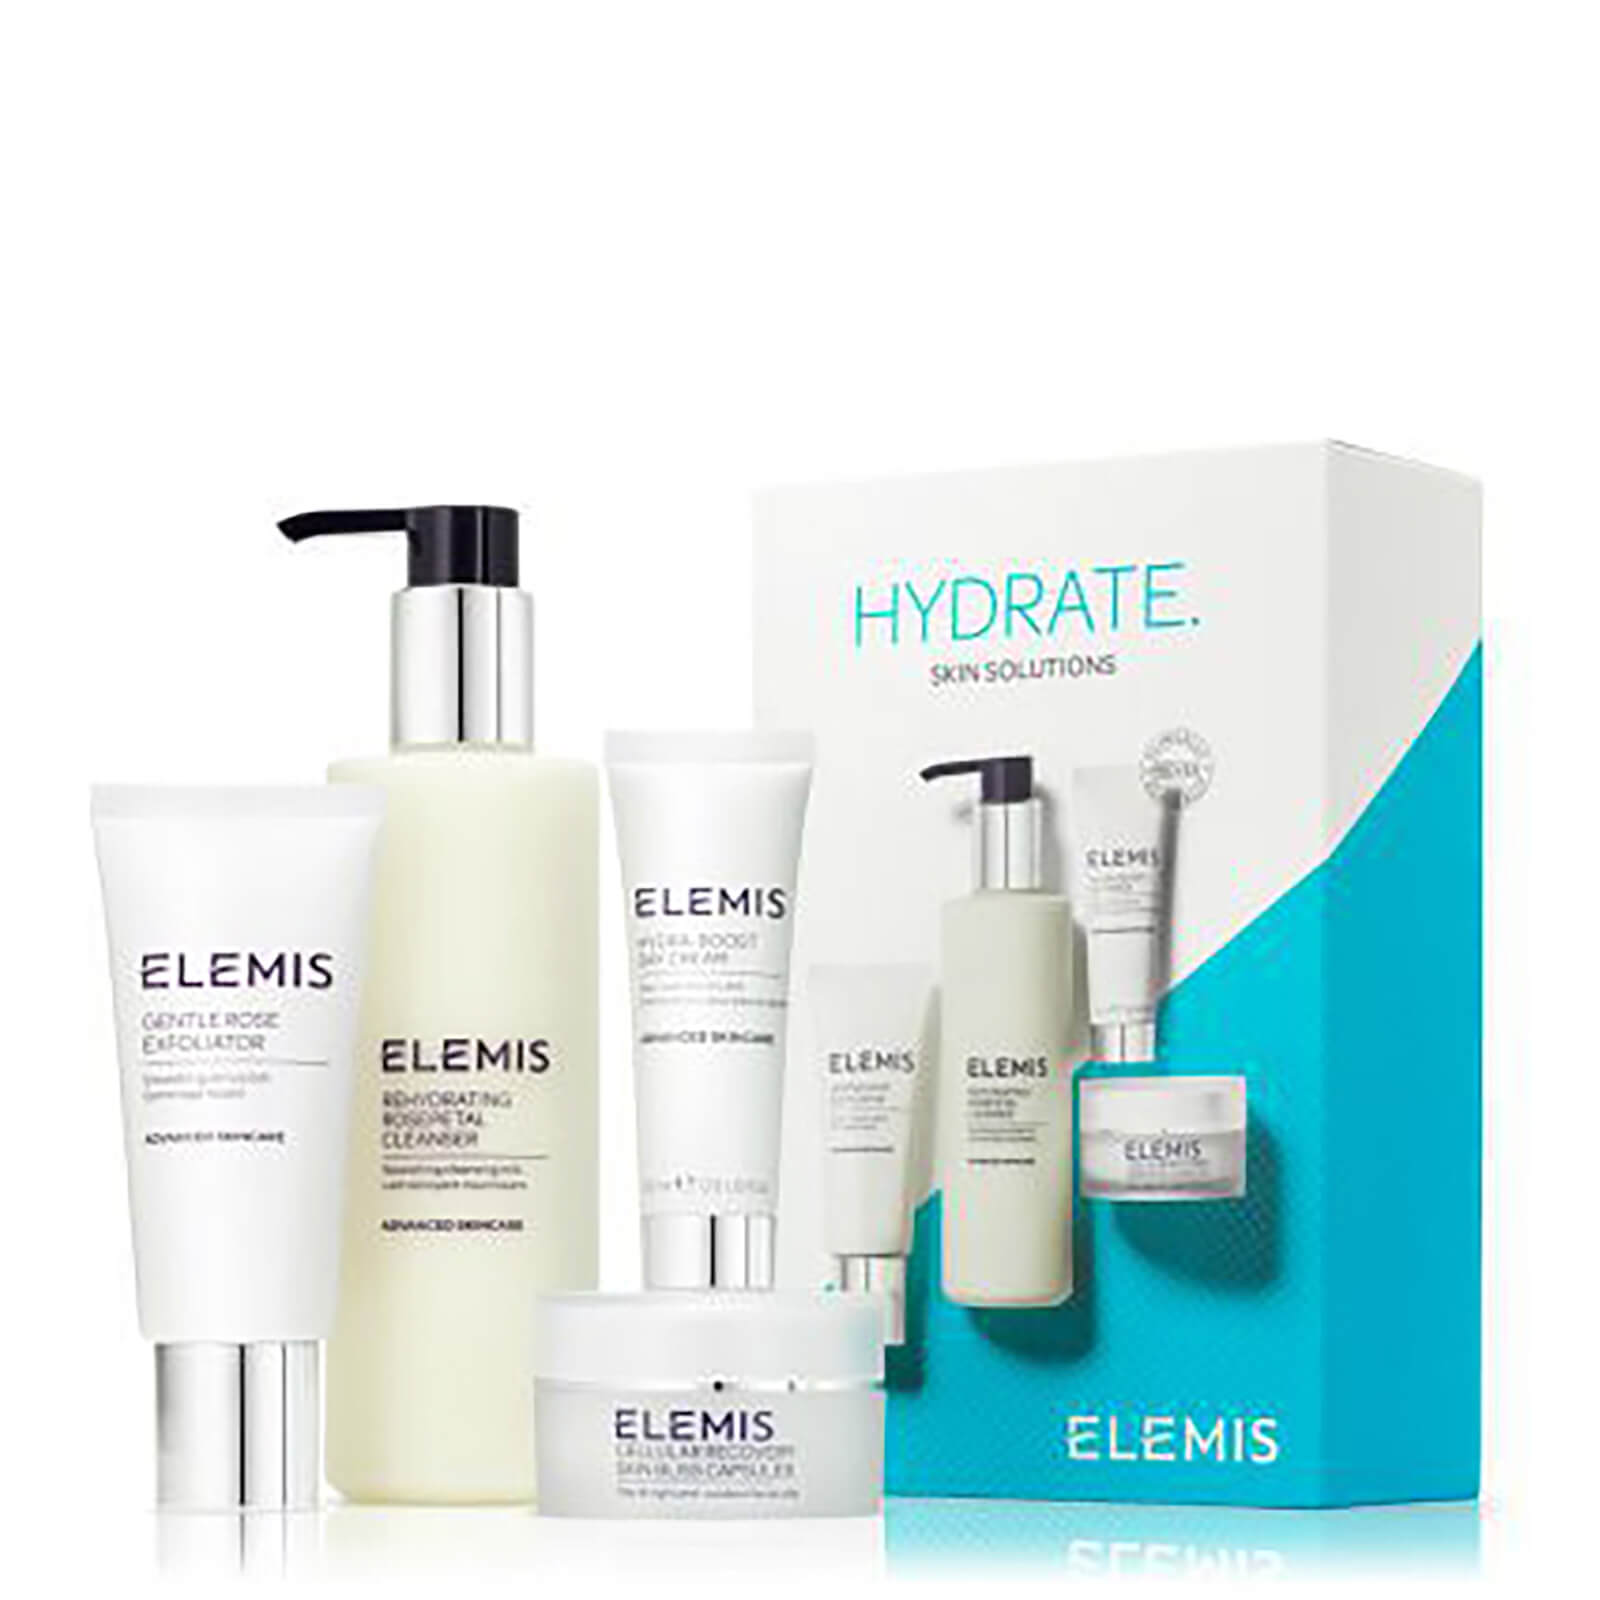 Elemis Your New Skin Solution - Hydrate